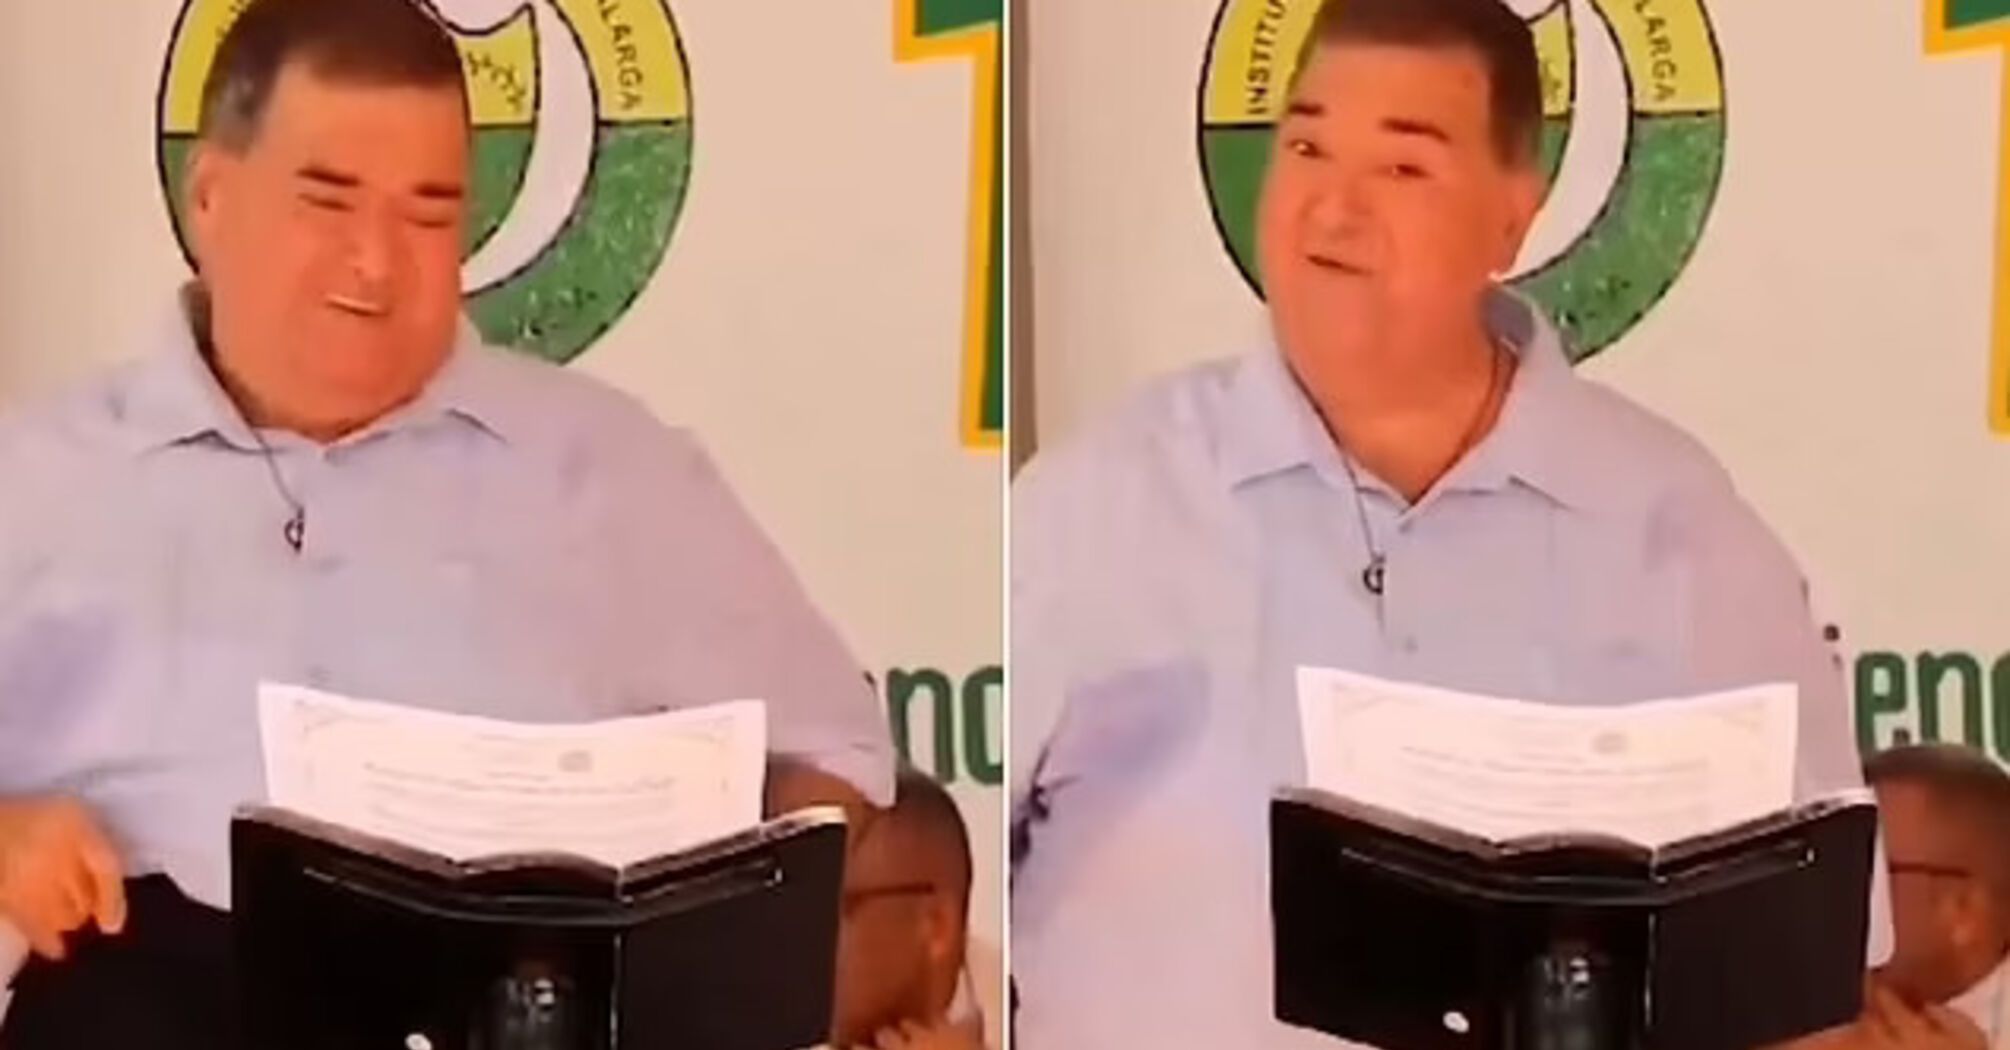 The mayor of the city "lost" his pants during a speech